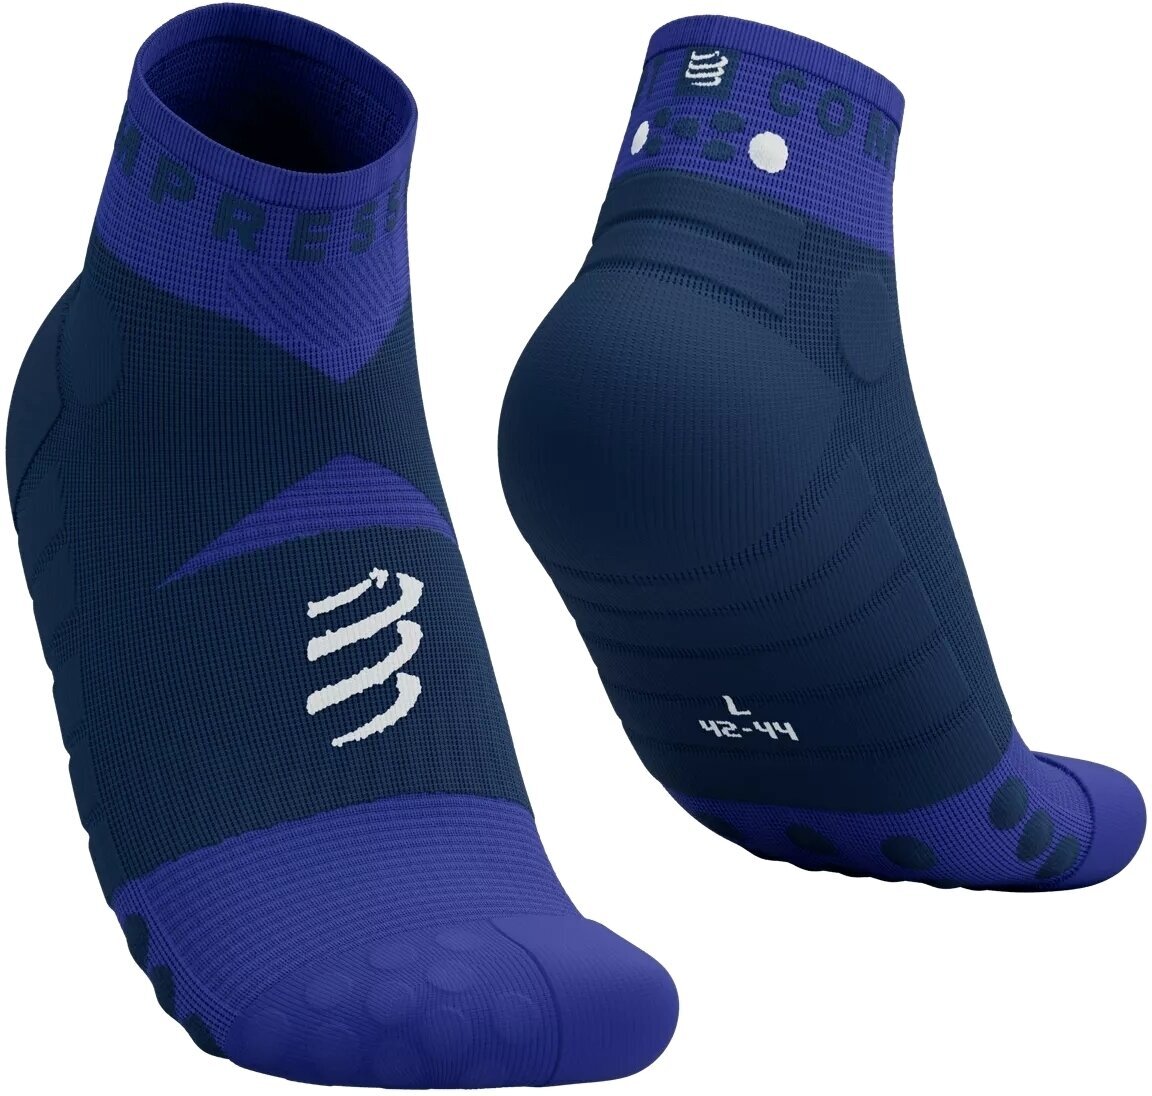 Calcetines para correr Compressport Ultra Trail Low Socks Dazzling Blue/Dress Blues/White T2 Calcetines para correr